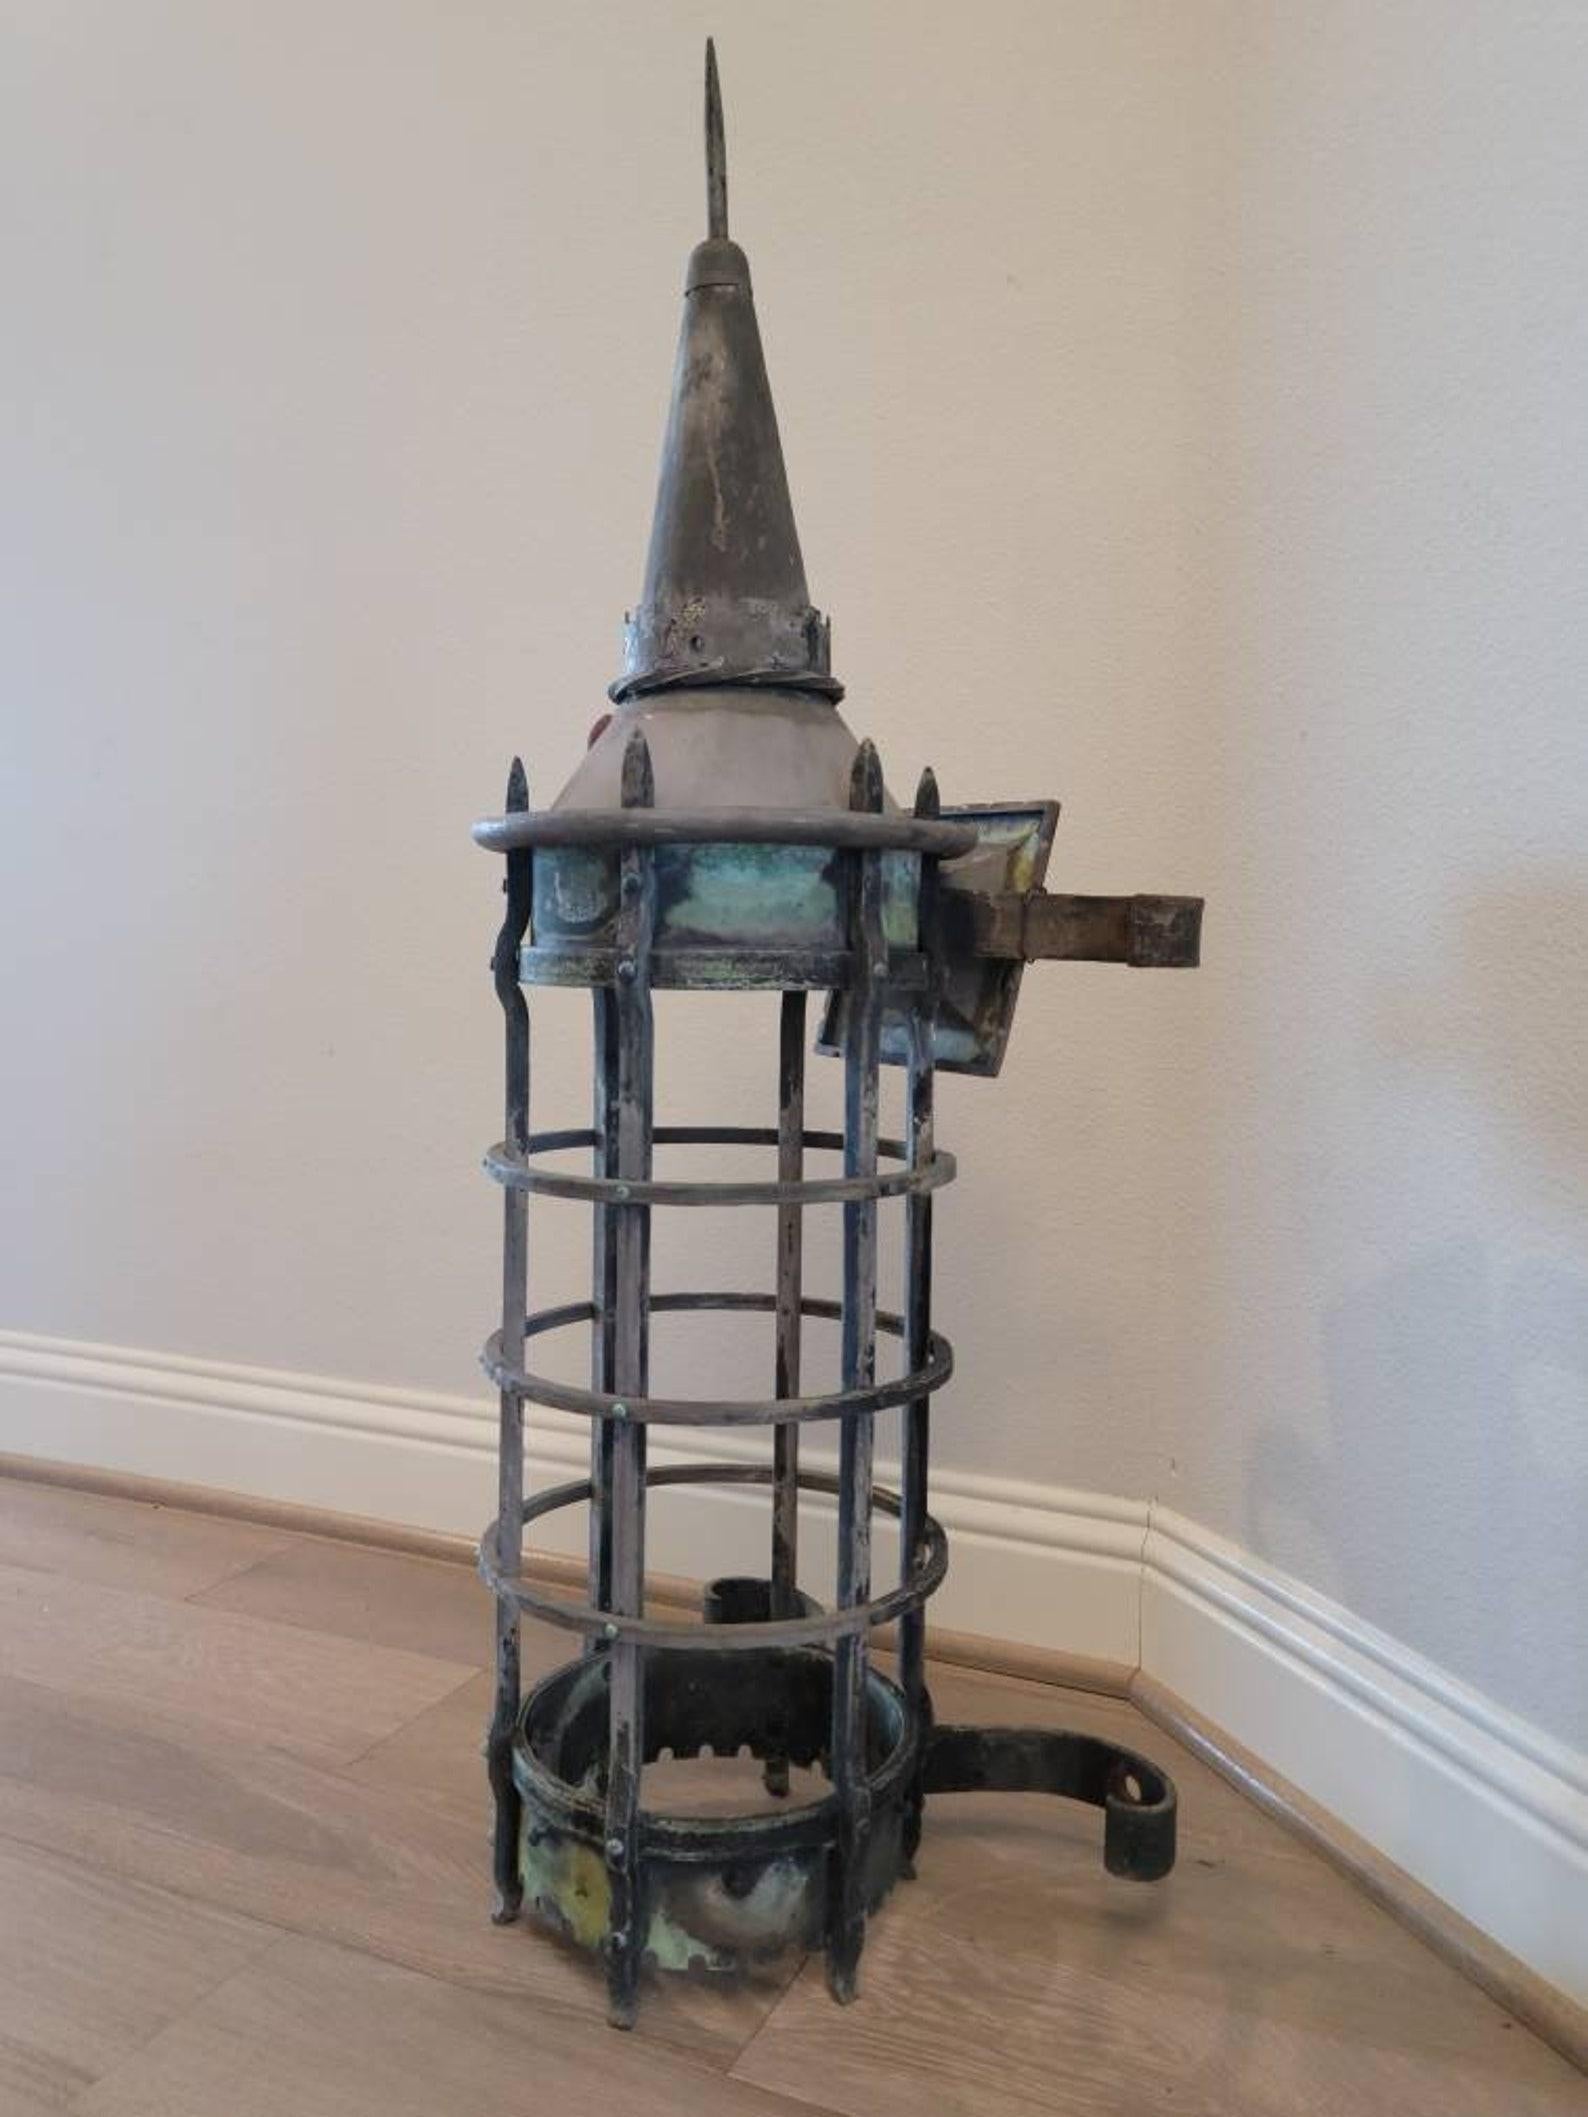 A magnificent French Gothic Revival outdoor lantern. 

The monumental size sconce with beautiful verdigris patina finish features a tall architectural iron cage body topped with an elongated needle-spire emerging from steeple tower surrounded by a